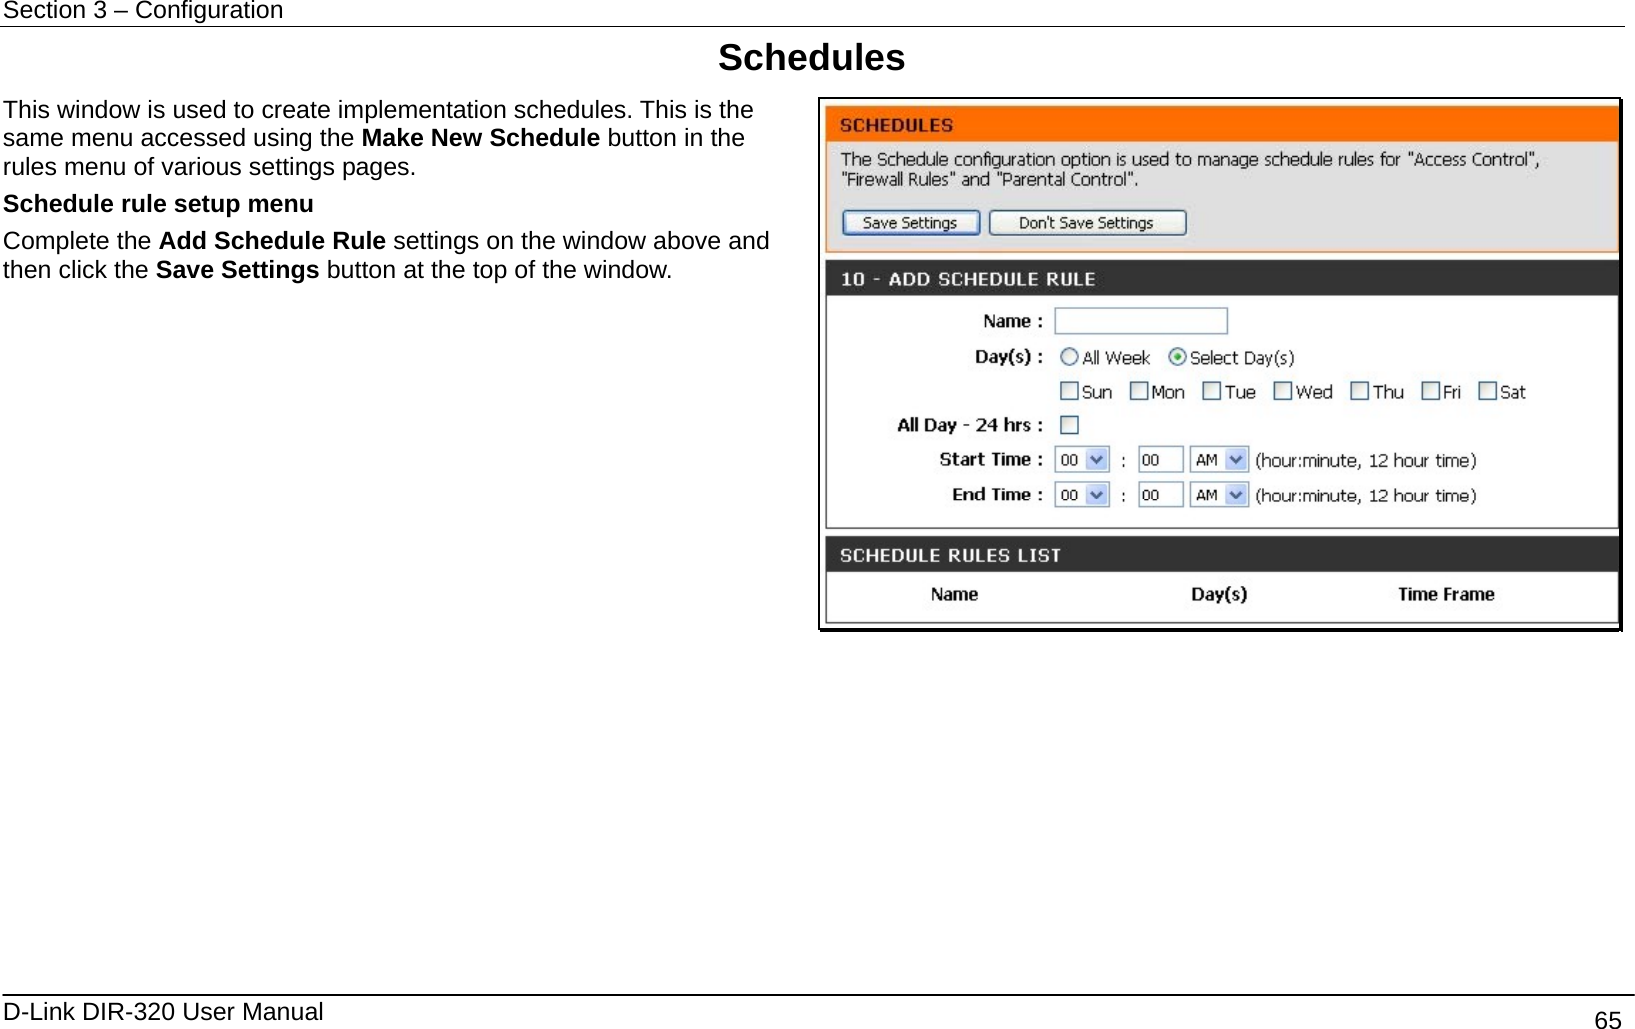 Section 3 – Configuration   D-Link DIR-320 User Manual                                       65 Schedules This window is used to create implementation schedules. This is the same menu accessed using the Make New Schedule button in the rules menu of various settings pages. Schedule rule setup menu Complete the Add Schedule Rule settings on the window above and then click the Save Settings button at the top of the window.            